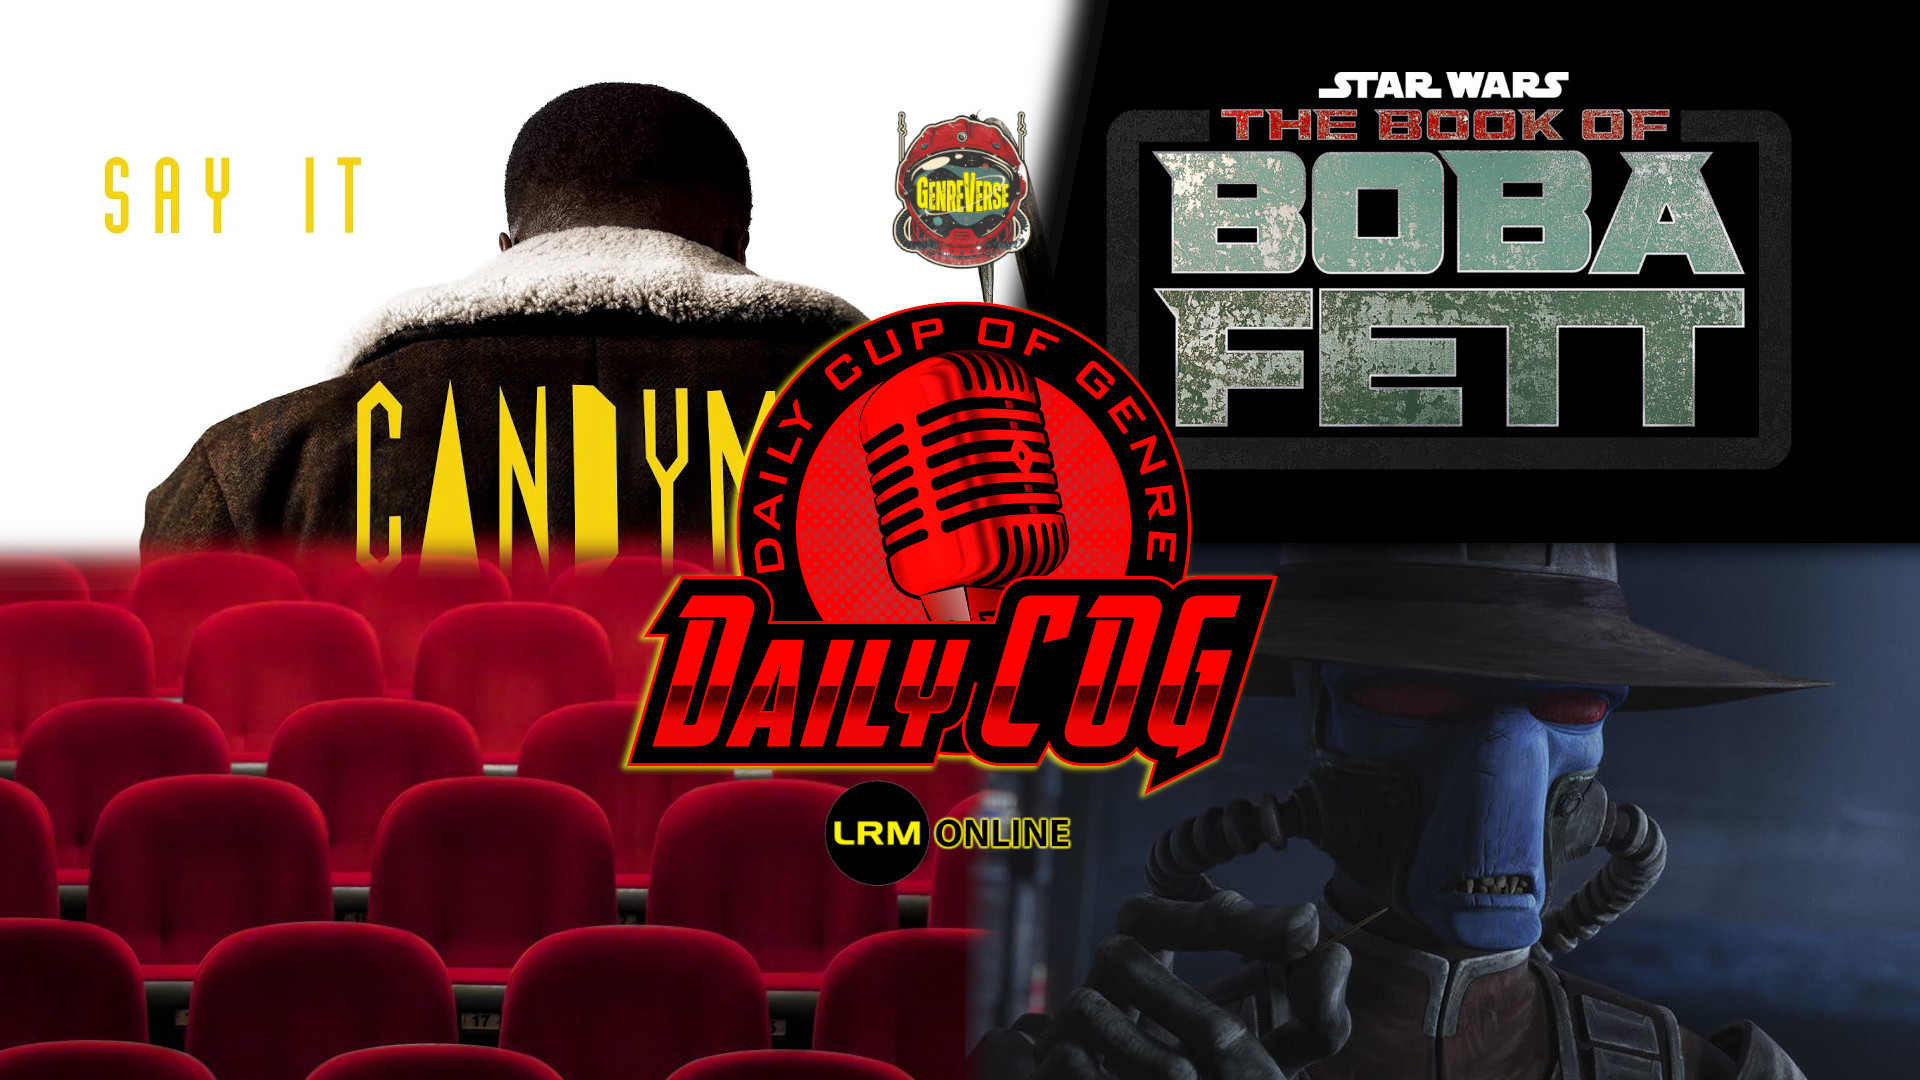 Candyman Box Office & Weekend Numbers Trend, Movie Budgets Need Cutting, And Cad Bane in The Book of Boba Fett | Daily COG